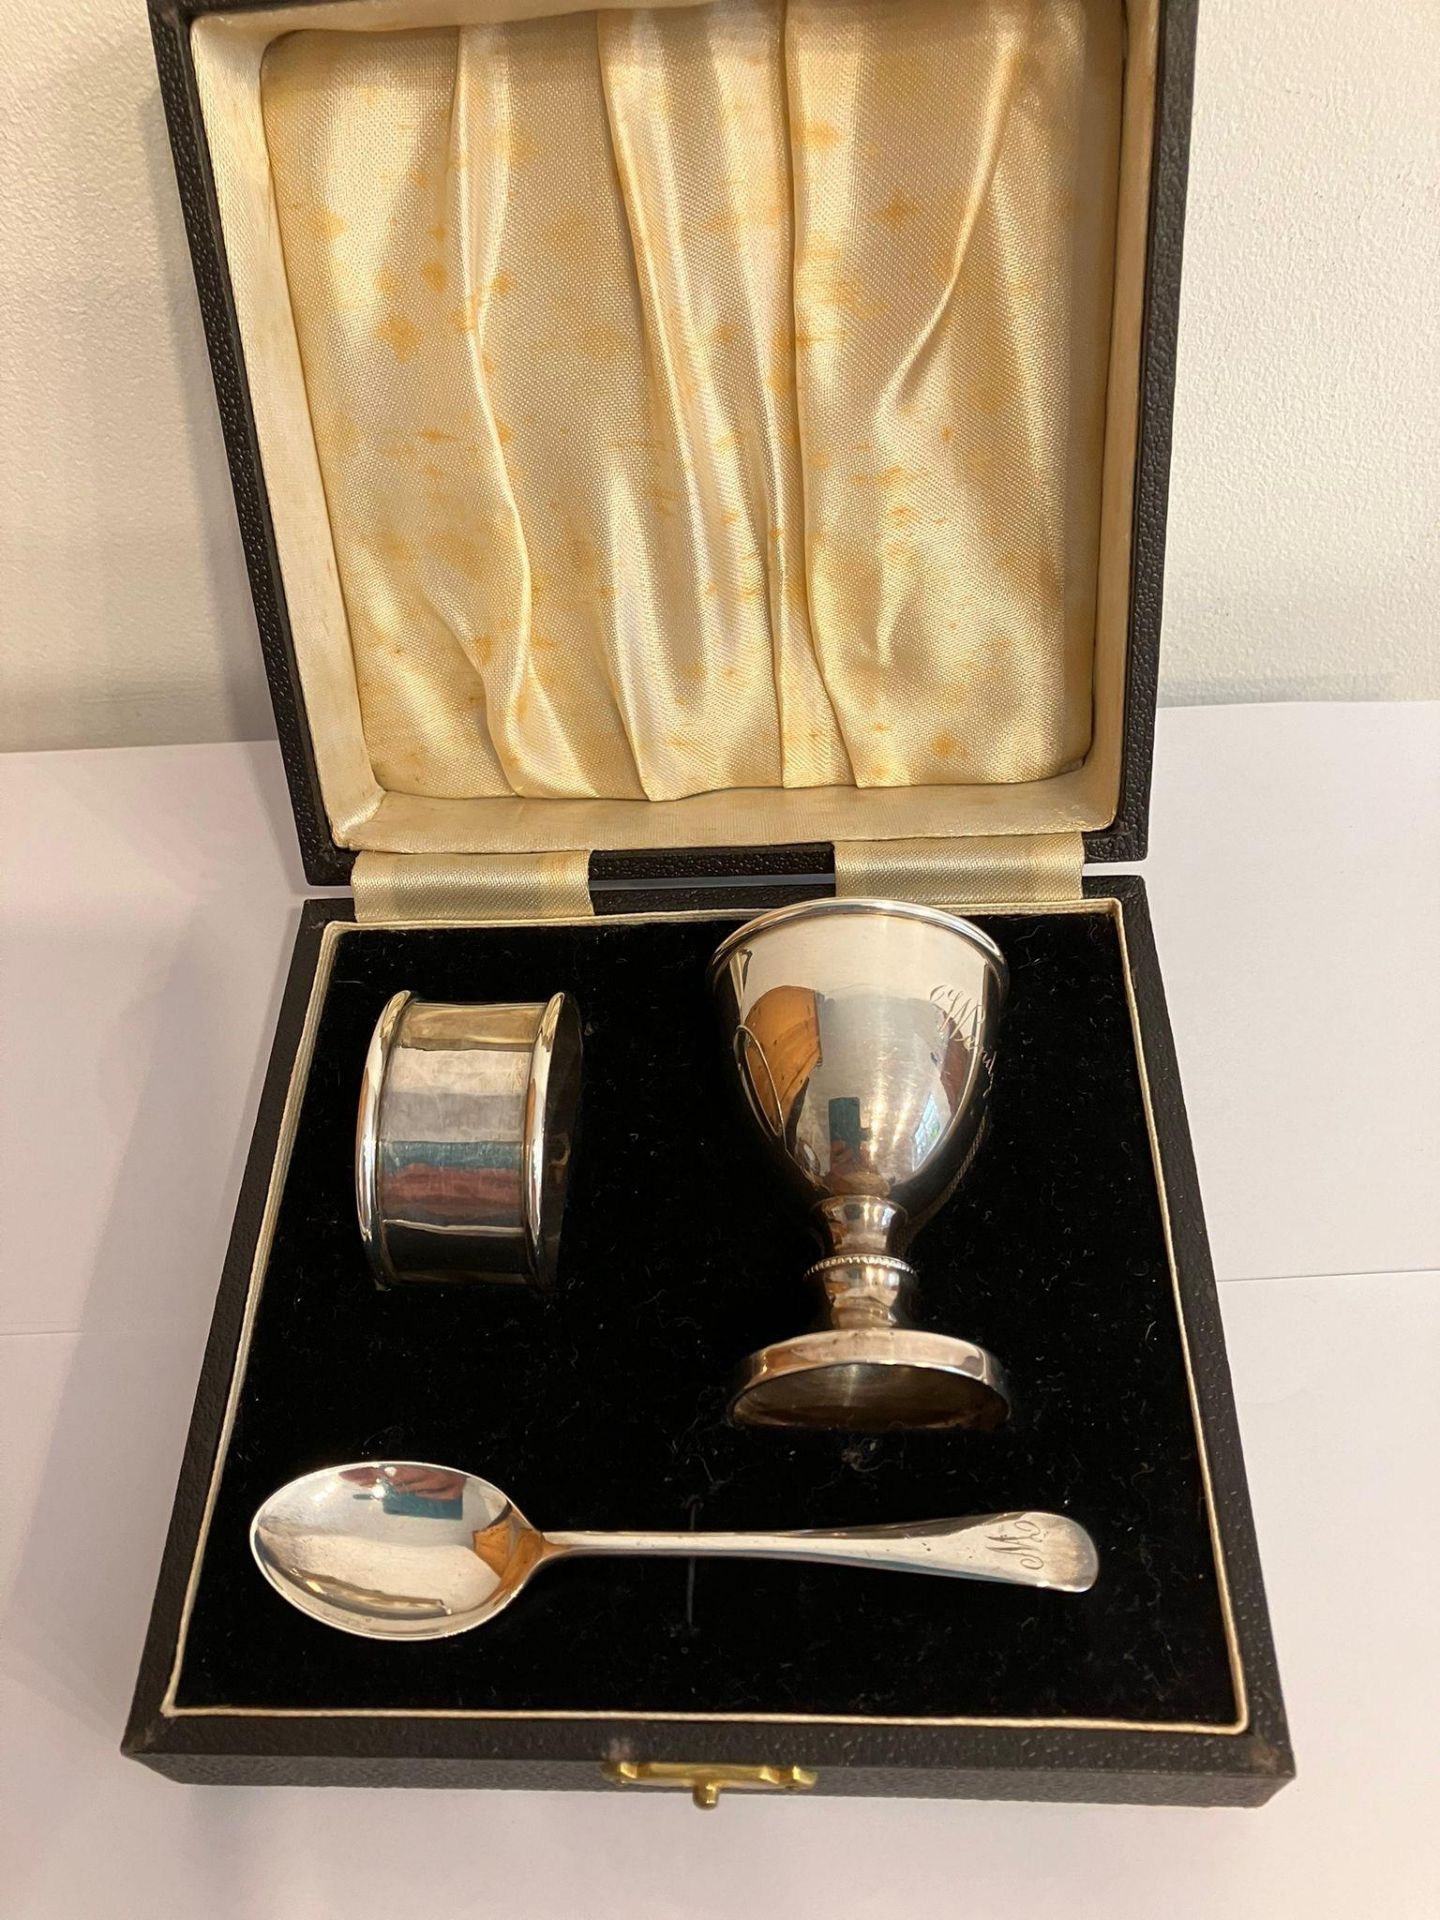 Antique SILVER CHRISTENING GIFT SET ago include Egg cup,Spoon and serviette ring. All pieces with - Image 8 of 9